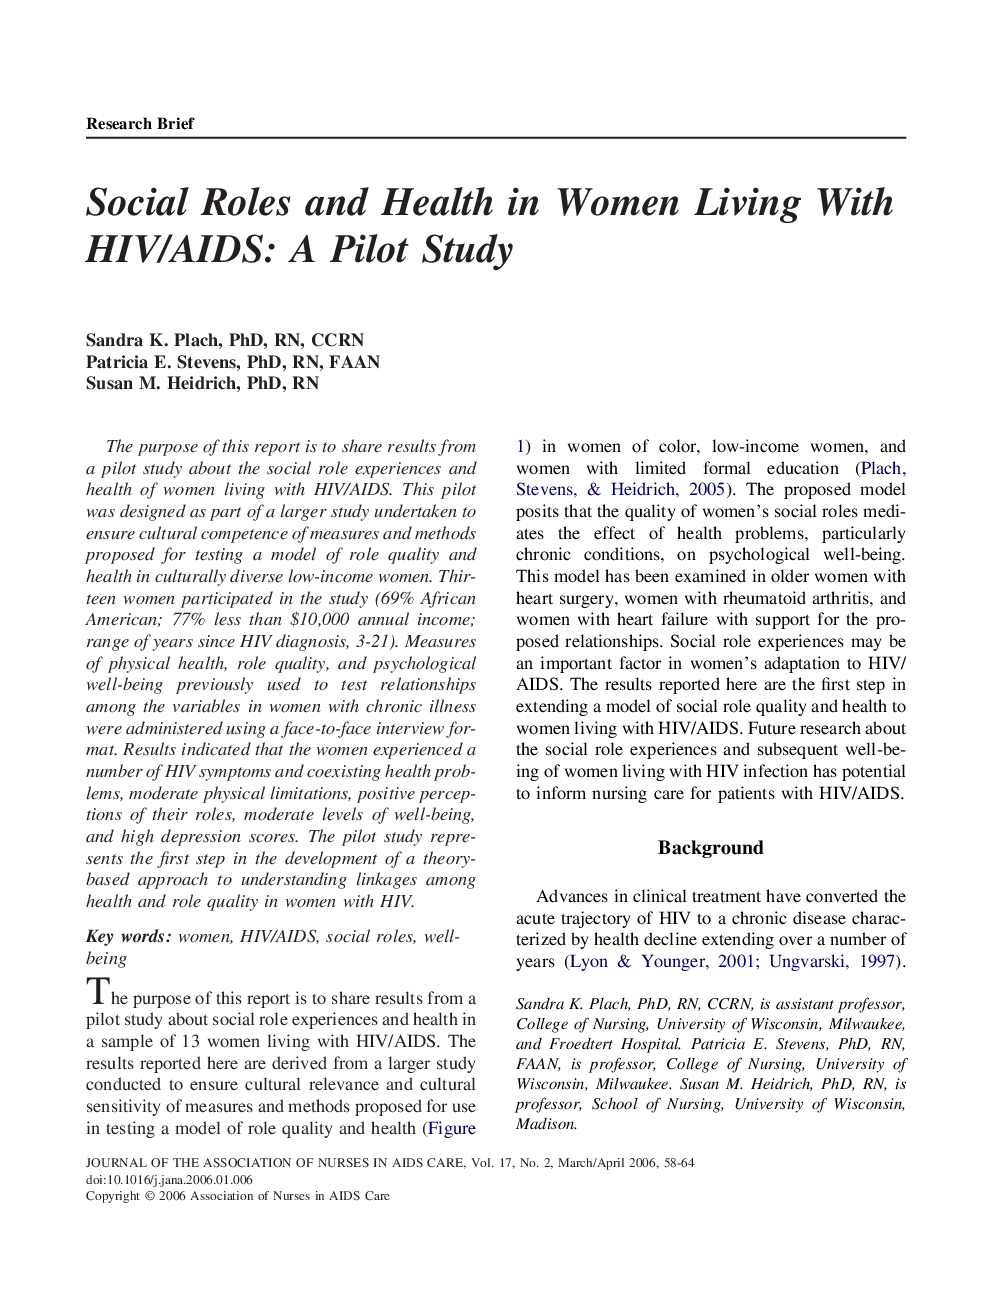 Social Roles and Health in Women Living With HIV/AIDS: A Pilot Study